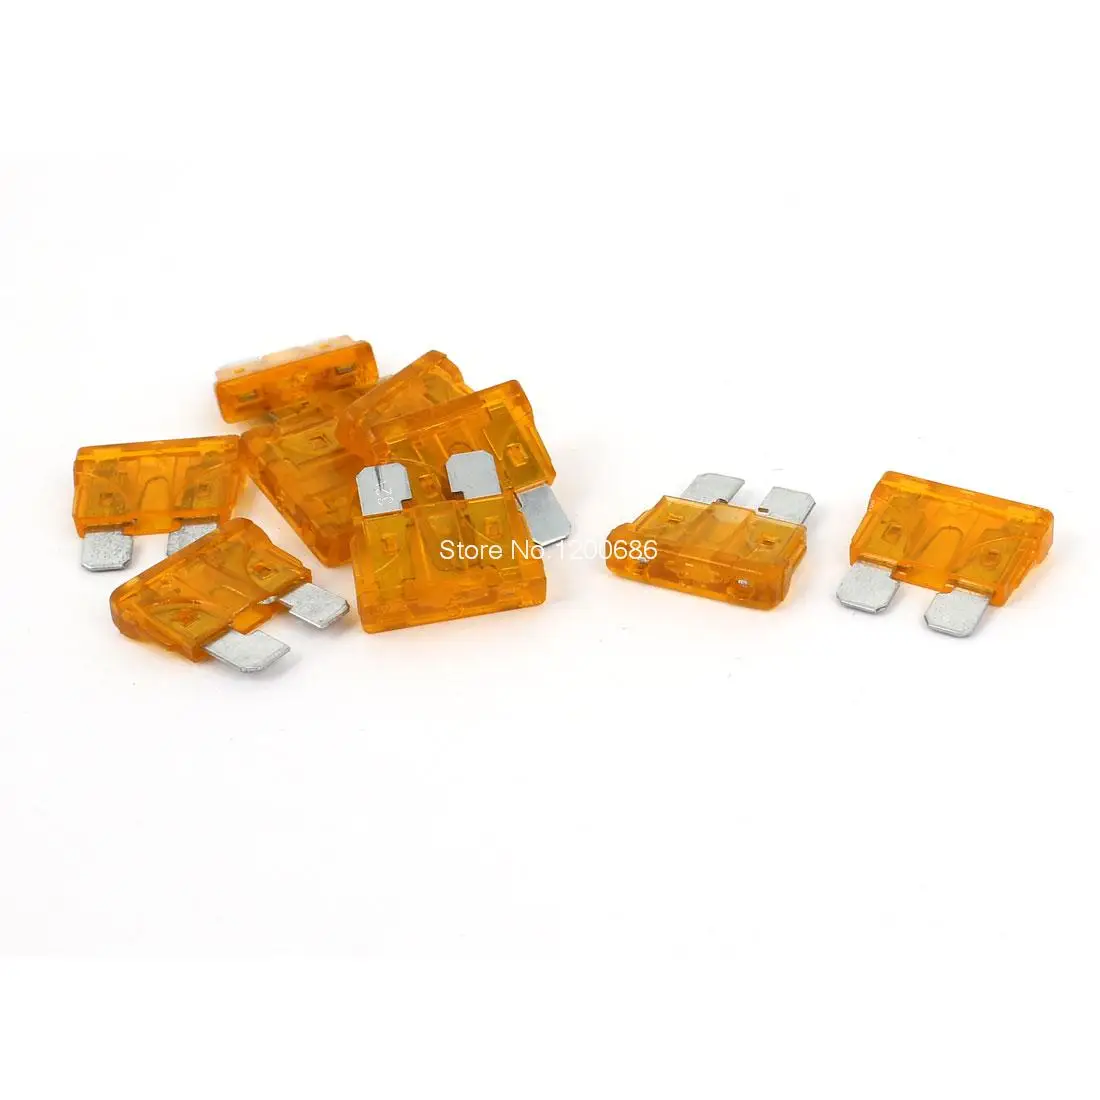 100 pack 5 Amp ATC Fuse Blade Style 5A Automotive Car Truck 